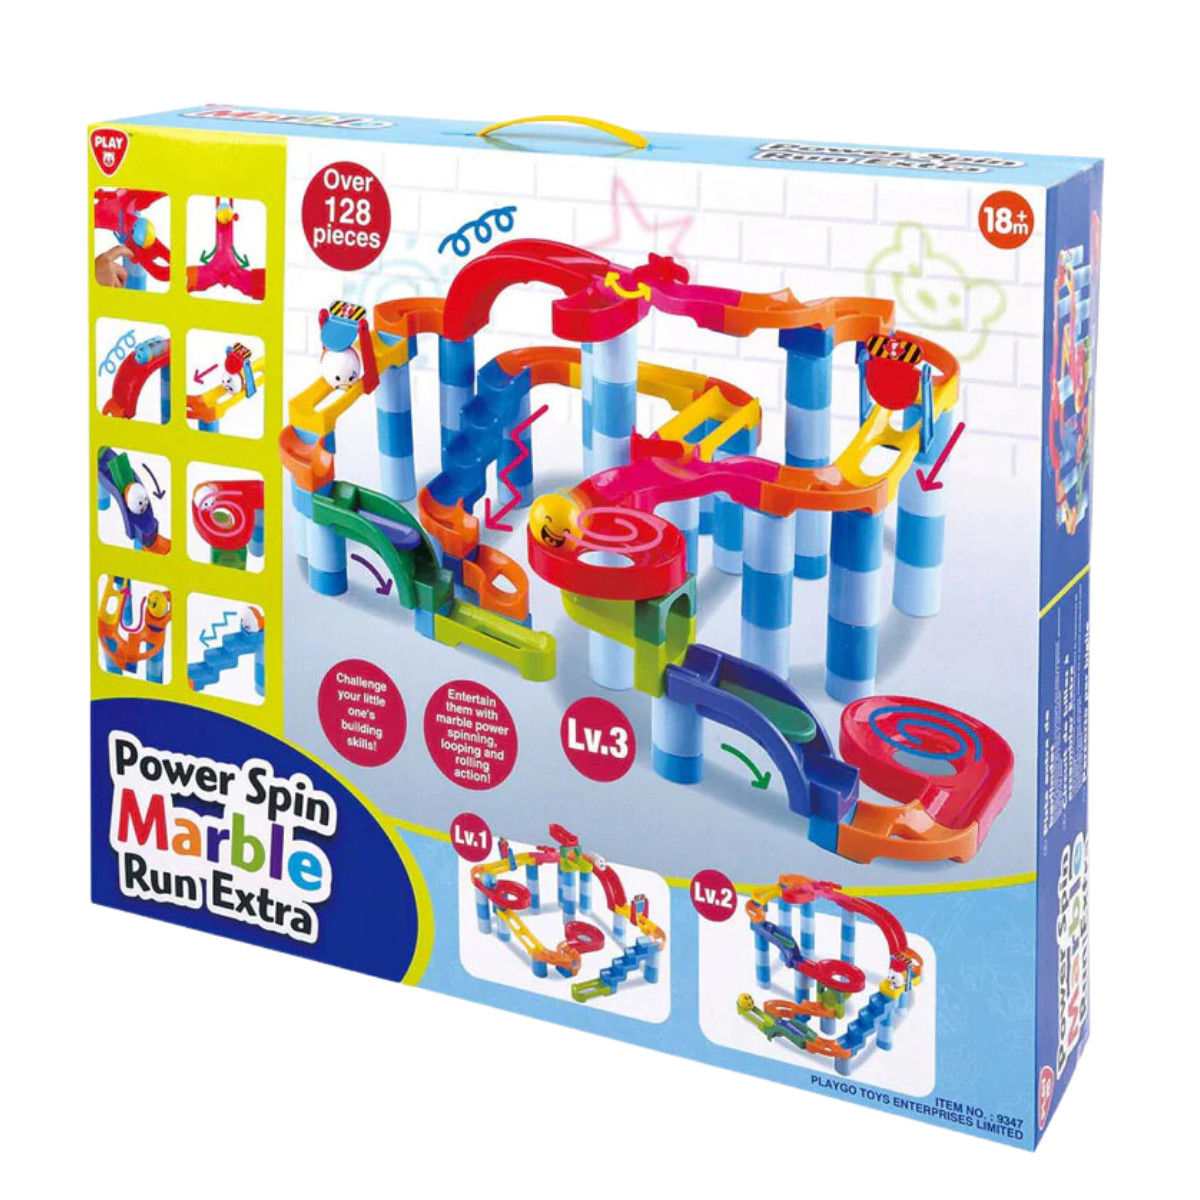 Power Spin Marble Run Extra